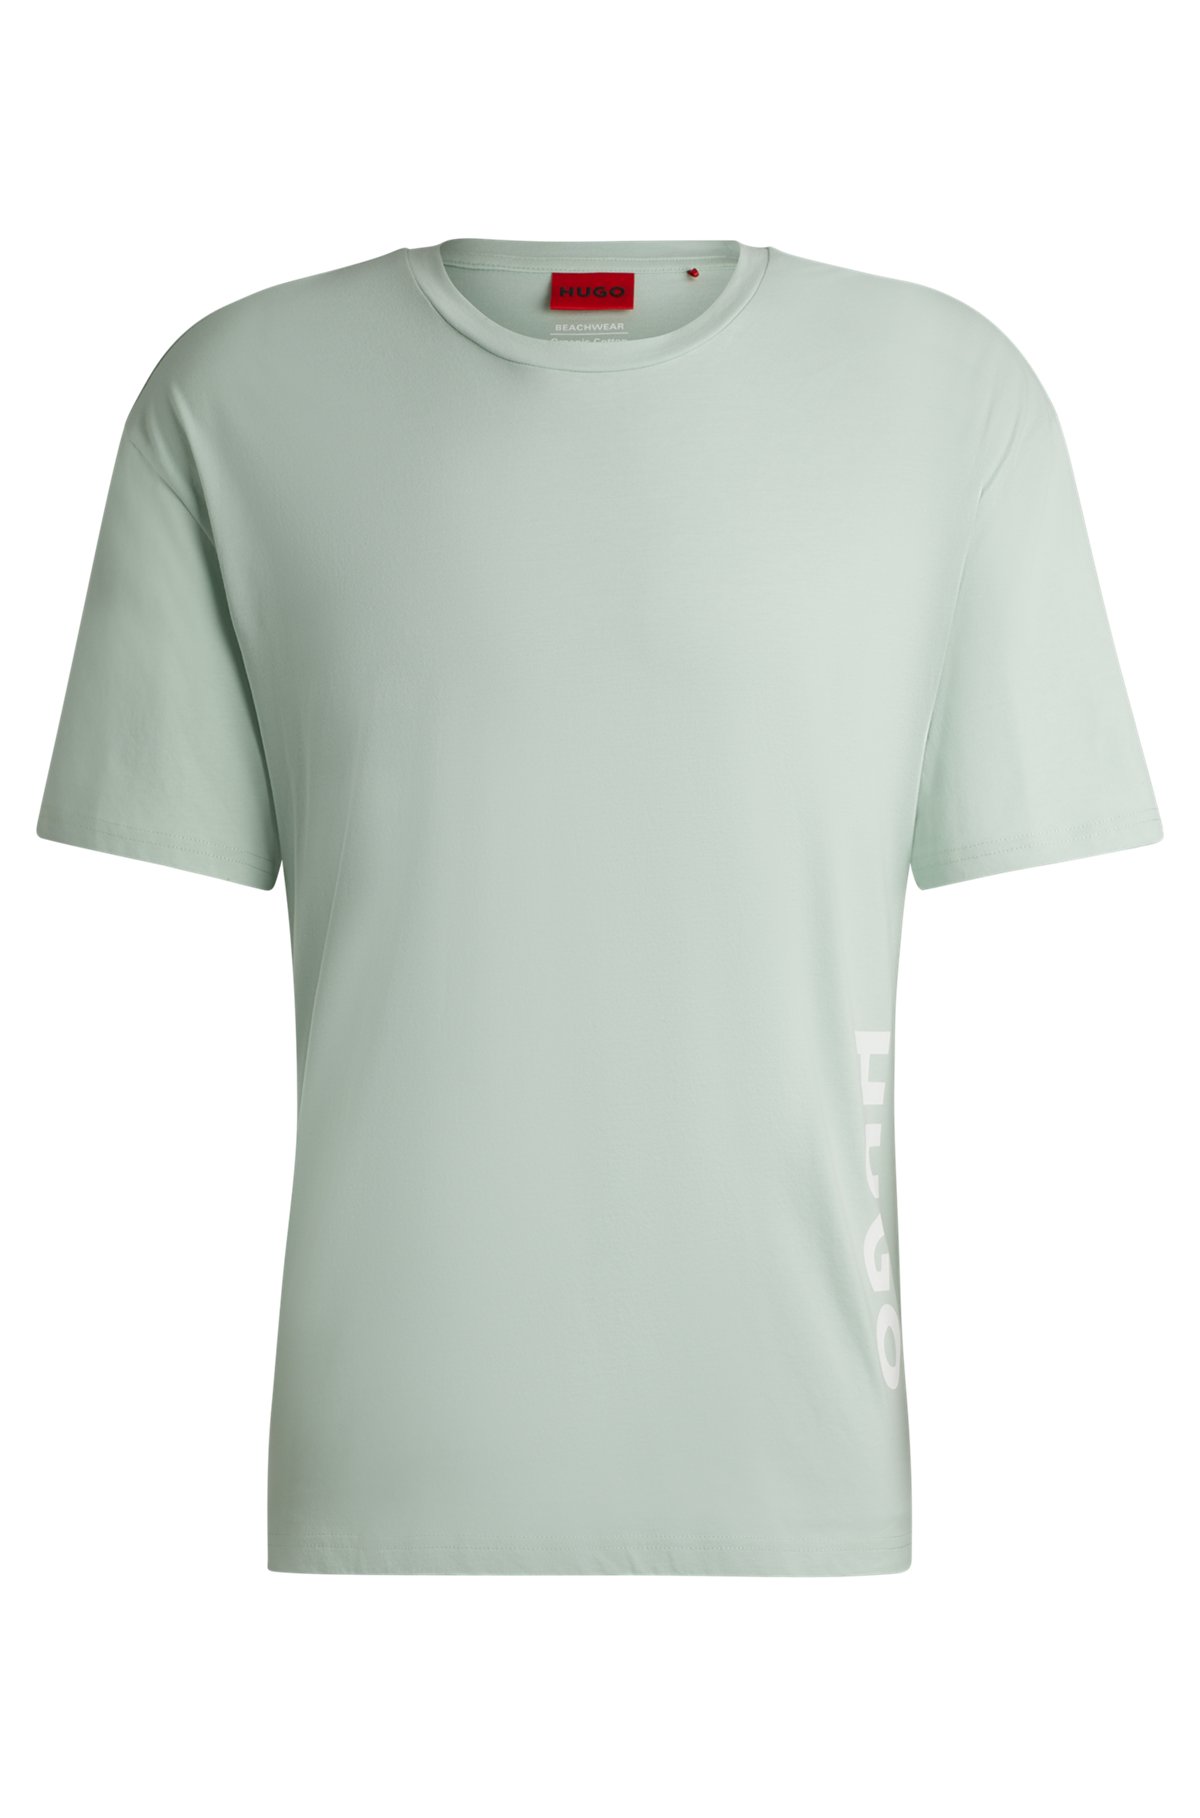 HUGO - Cotton-jersey T-shirt with SPF 50+ UV protection